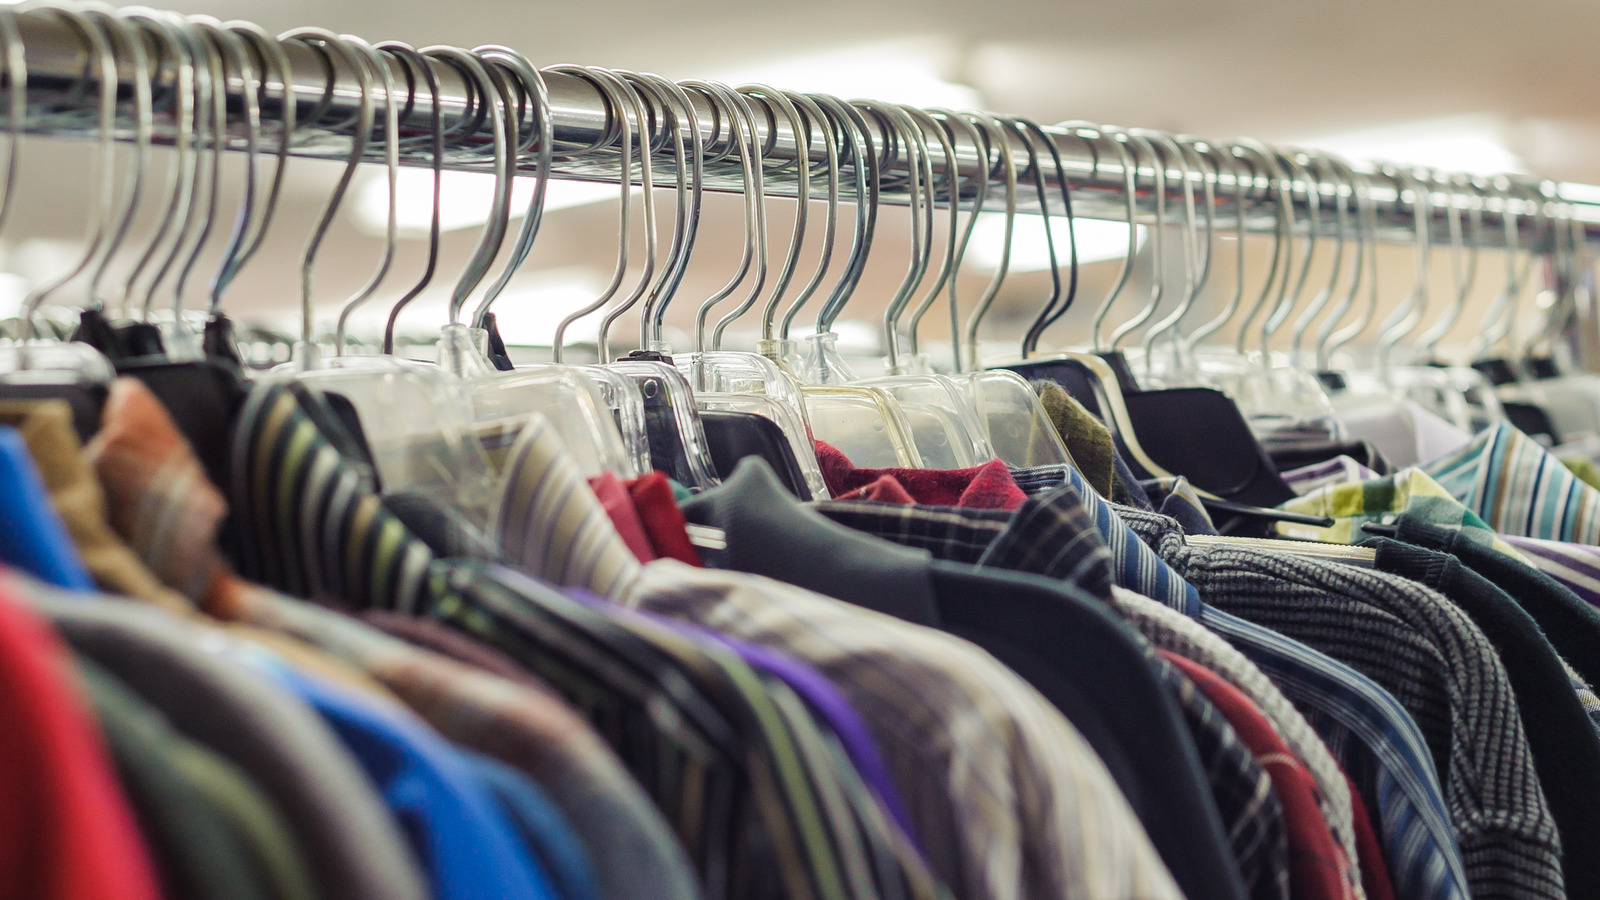 The Real Reason Shoppers Aren't Happy With Goodwill's Prices